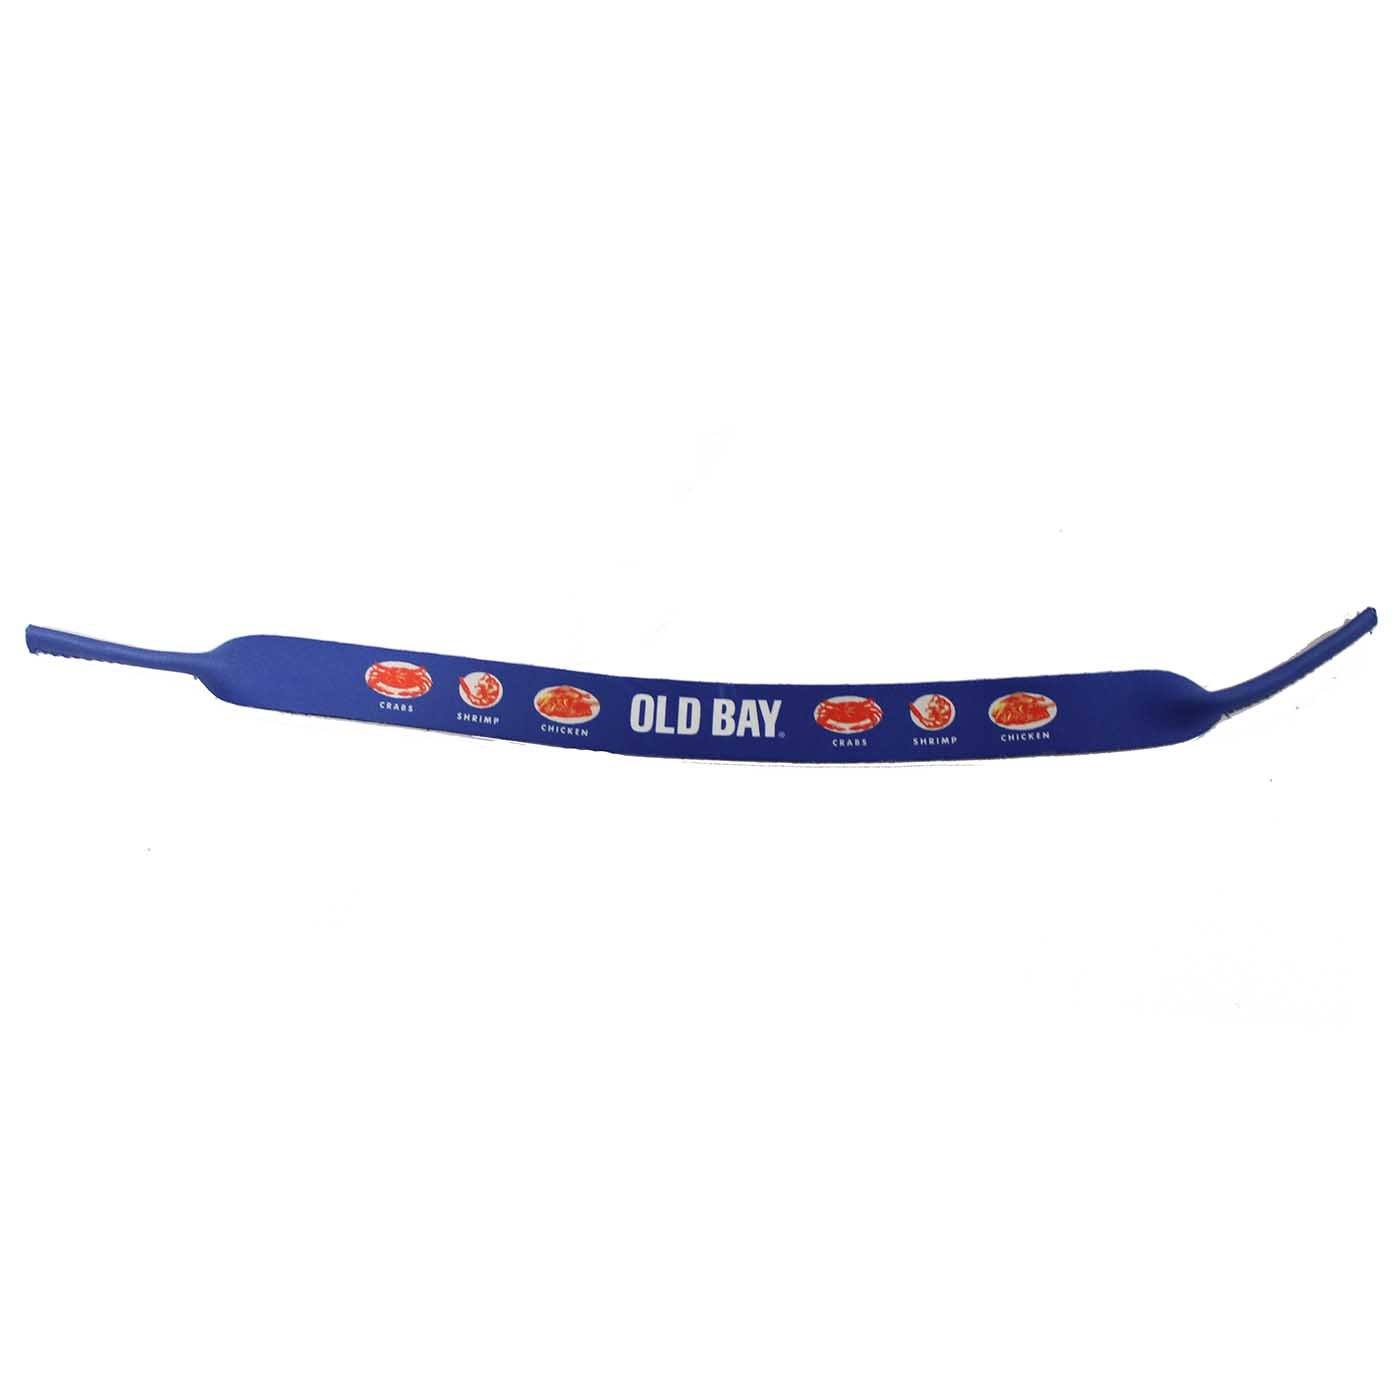 Old Bay with Plates / Neoprene Sunglass Strap - Route One Apparel